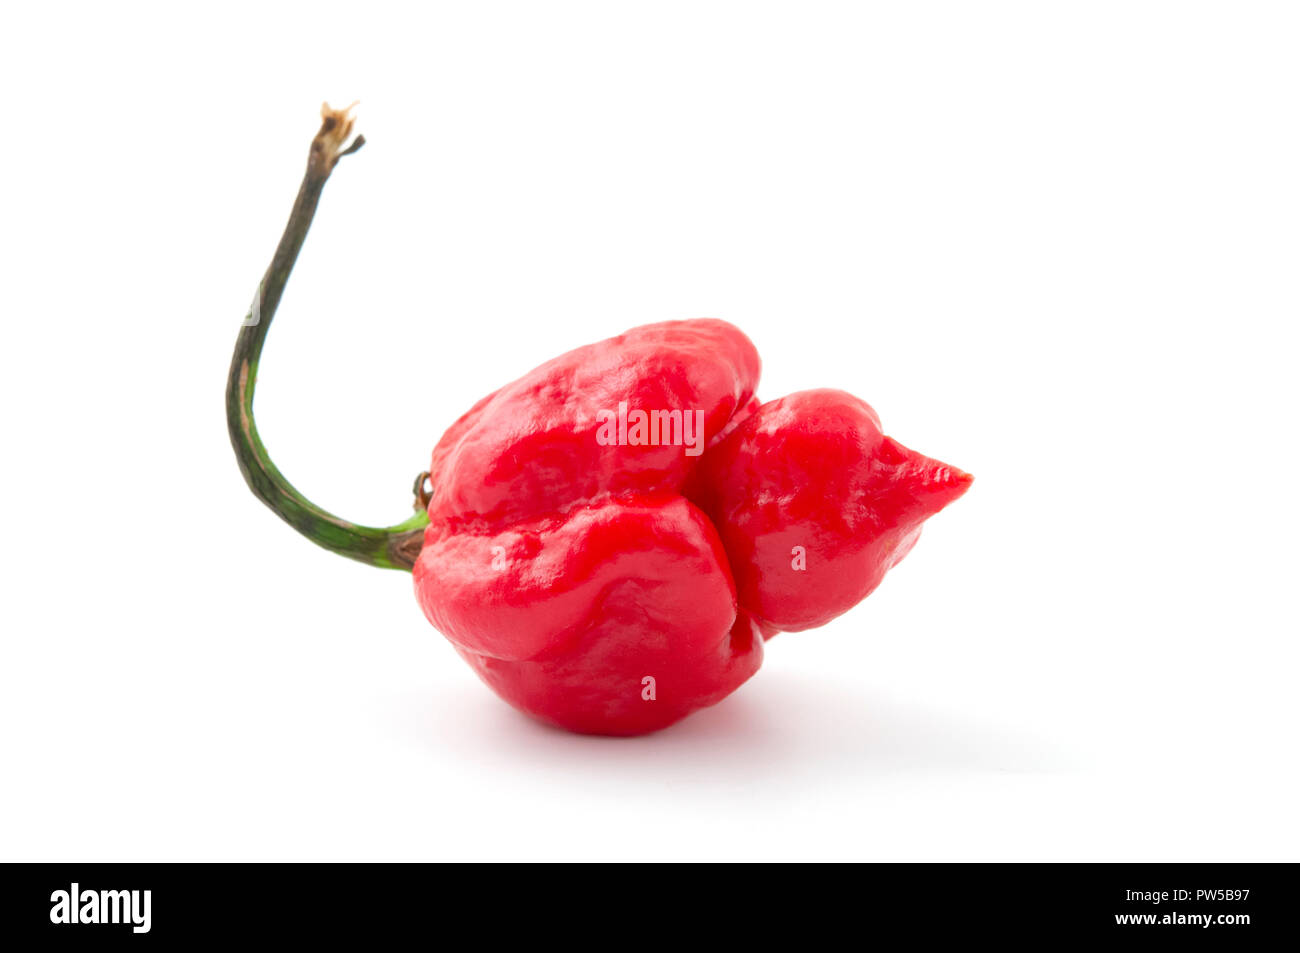 Carolina reaper chili pepper on a white background Banque D'Images